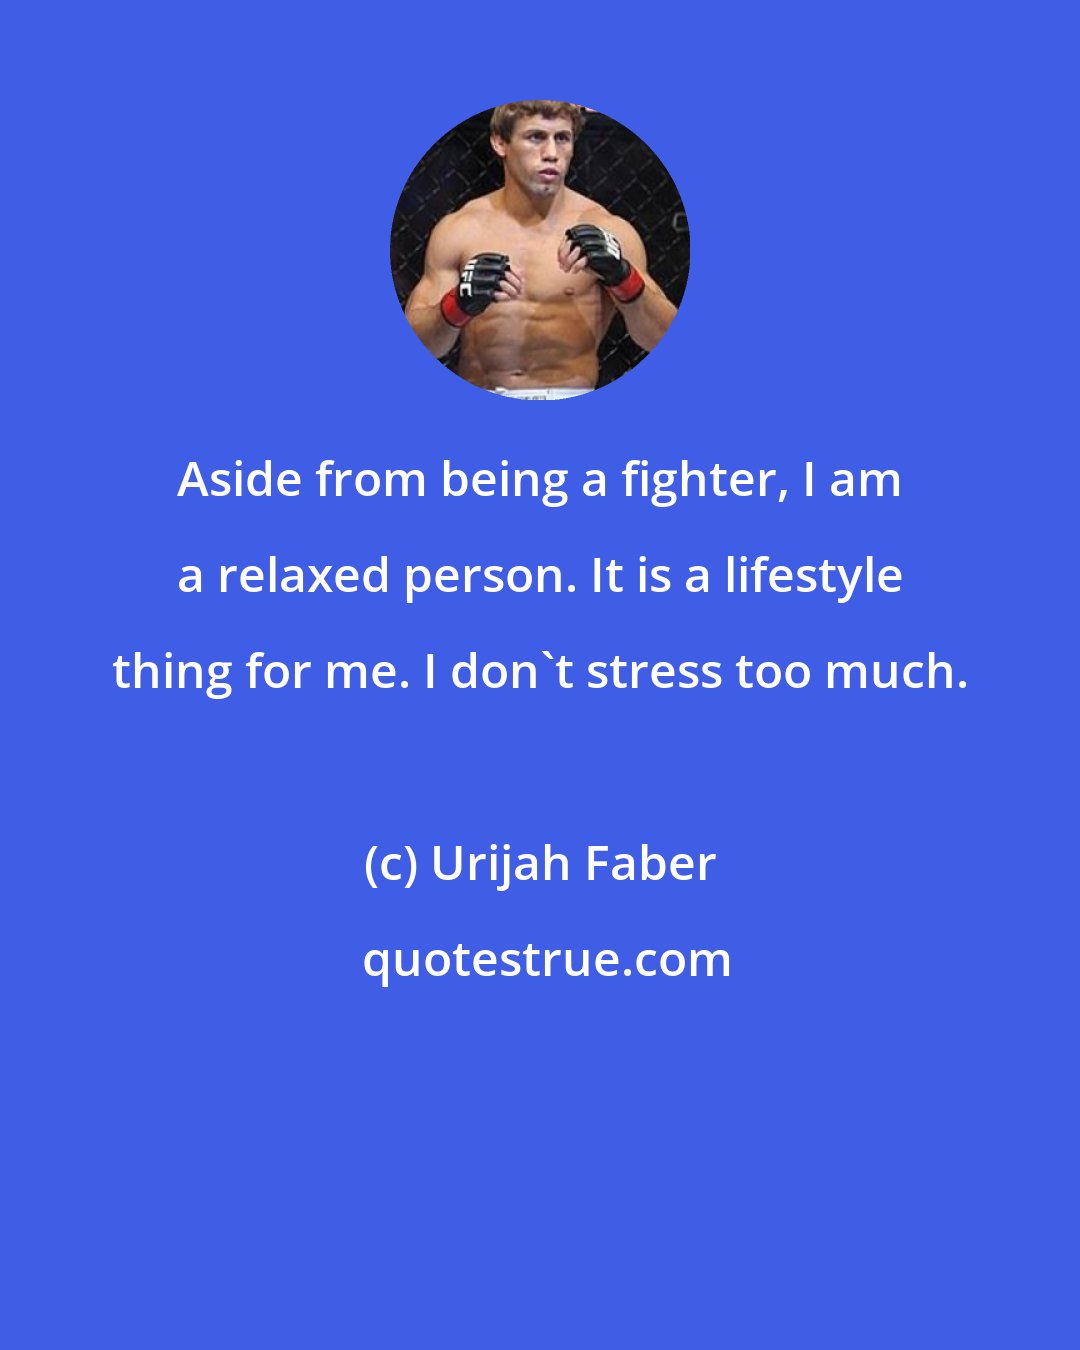 Urijah Faber: Aside from being a fighter, I am a relaxed person. It is a lifestyle thing for me. I don't stress too much.